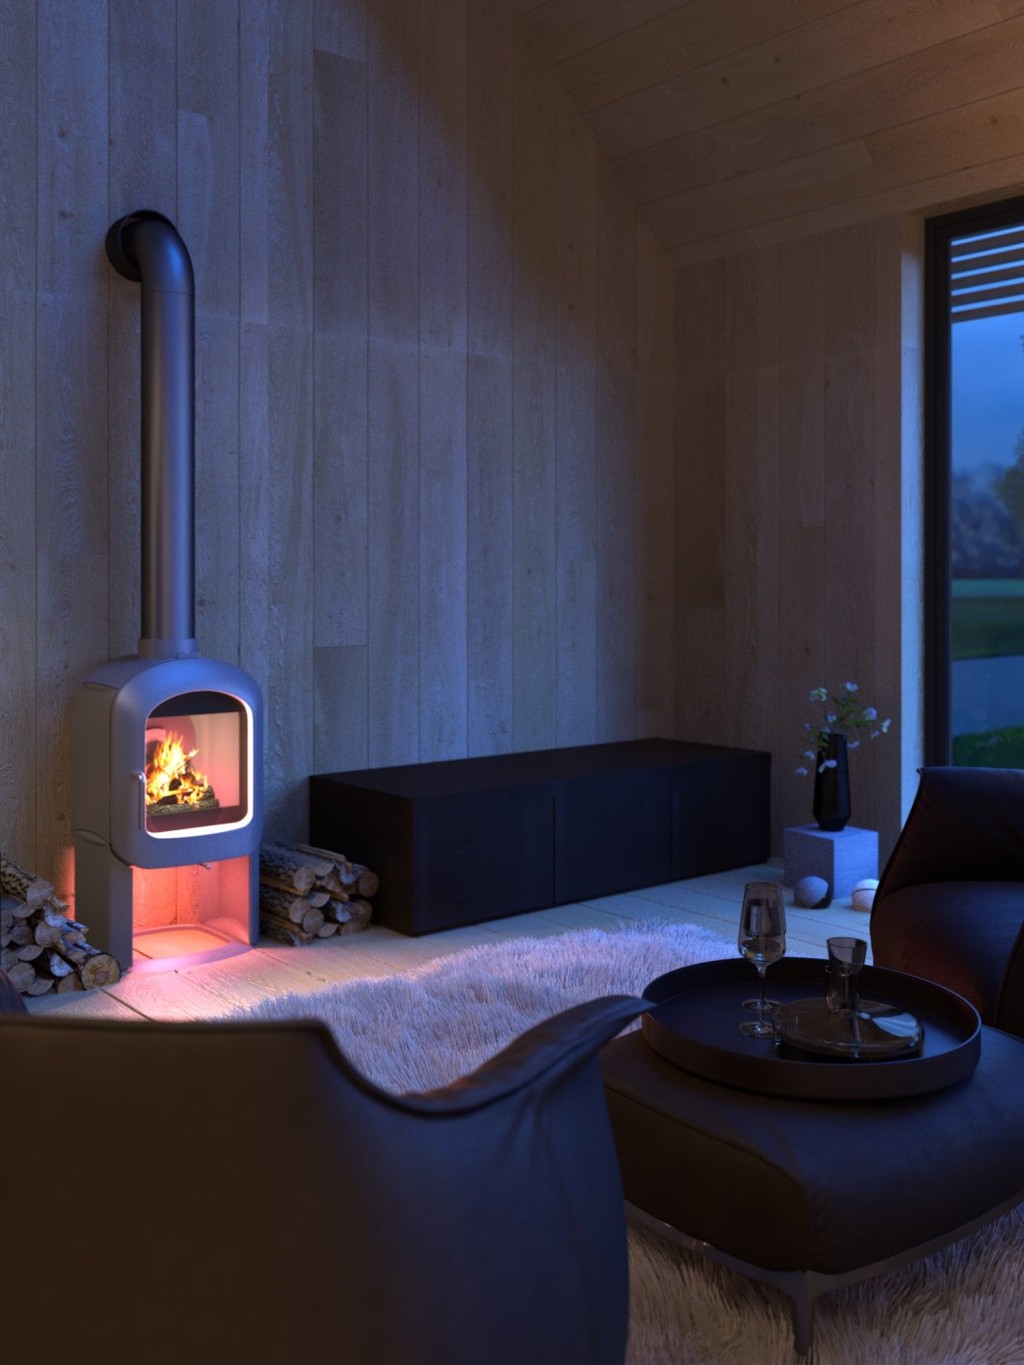 Intimate corner of a barn conversion at dusk, featuring a modern freestanding wood-burning stove, plush black seating, and a shaggy white rug, with two wine glasses on a tray, offering a romantic and cosy atmosphere.